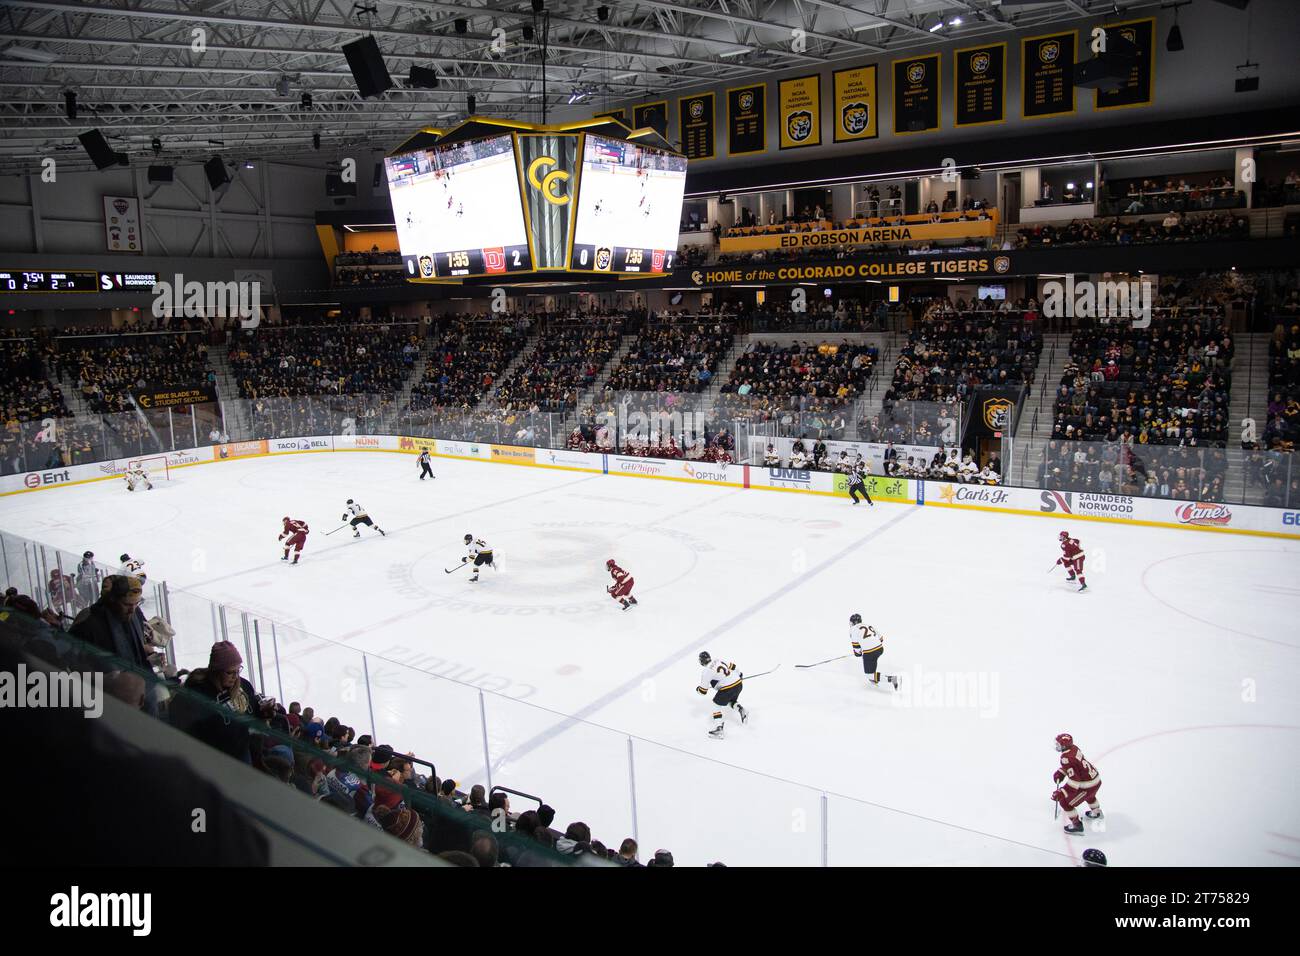 Colorado College ice hockey team plays in Robson Arena on the campus of Colorado College in downtown Colorado Springs.  Robson can hold 3500 fans. Stock Photo